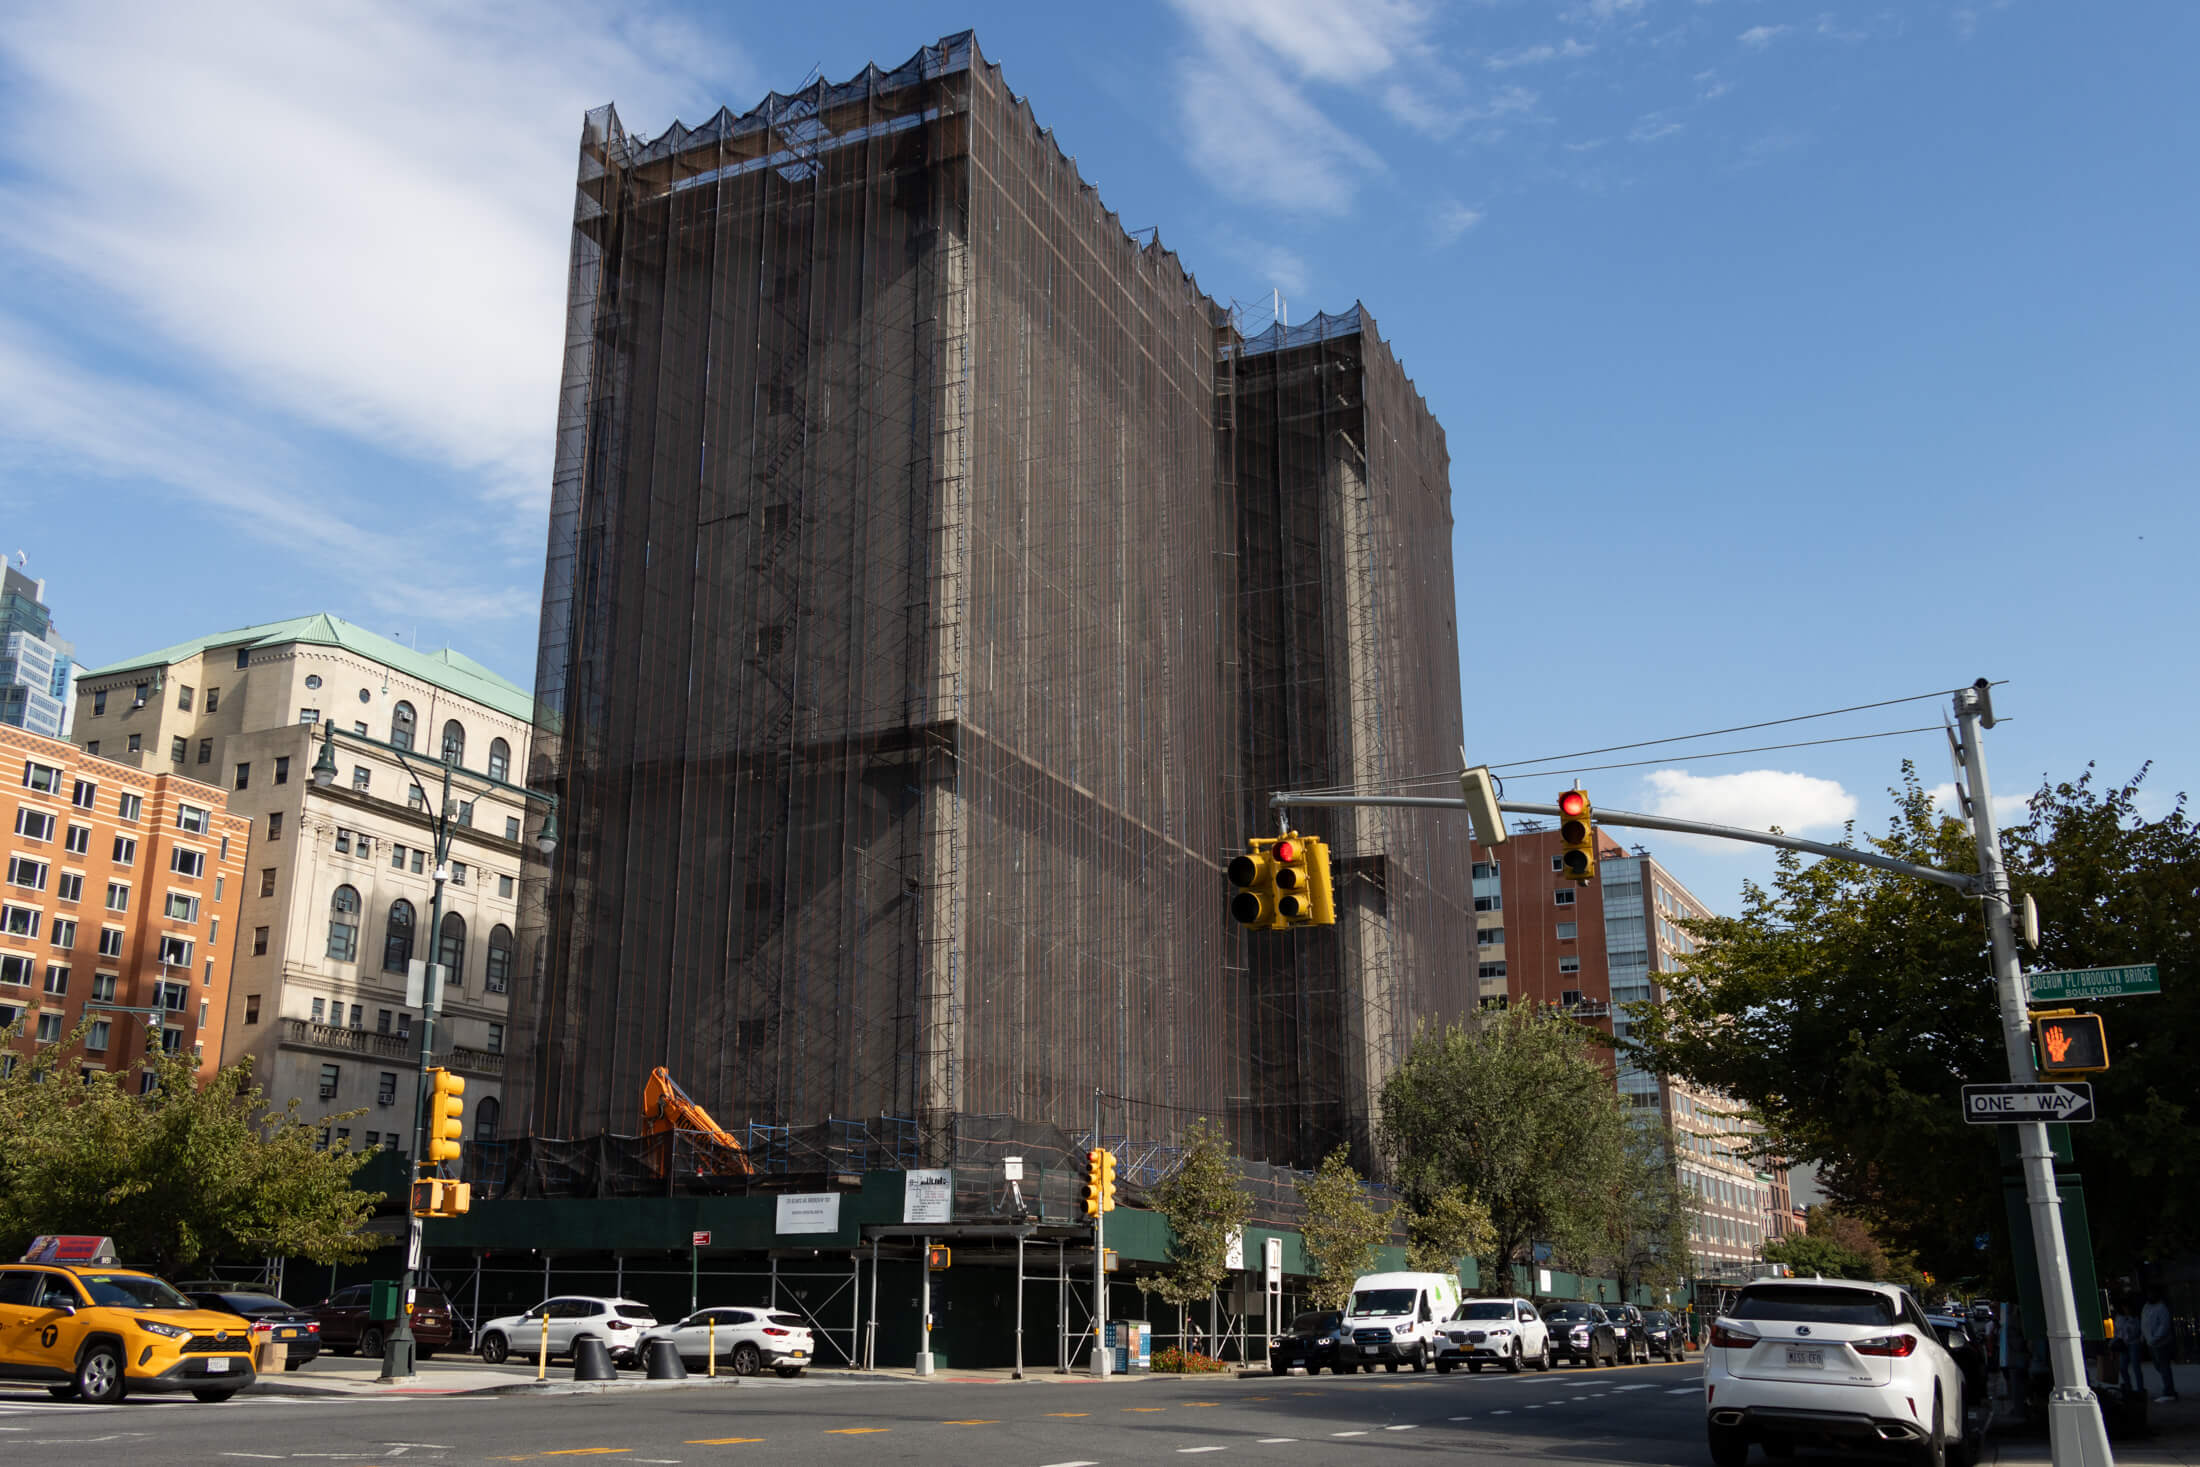 view of the scaffolded jail on atlantic avenue looking toward smith street